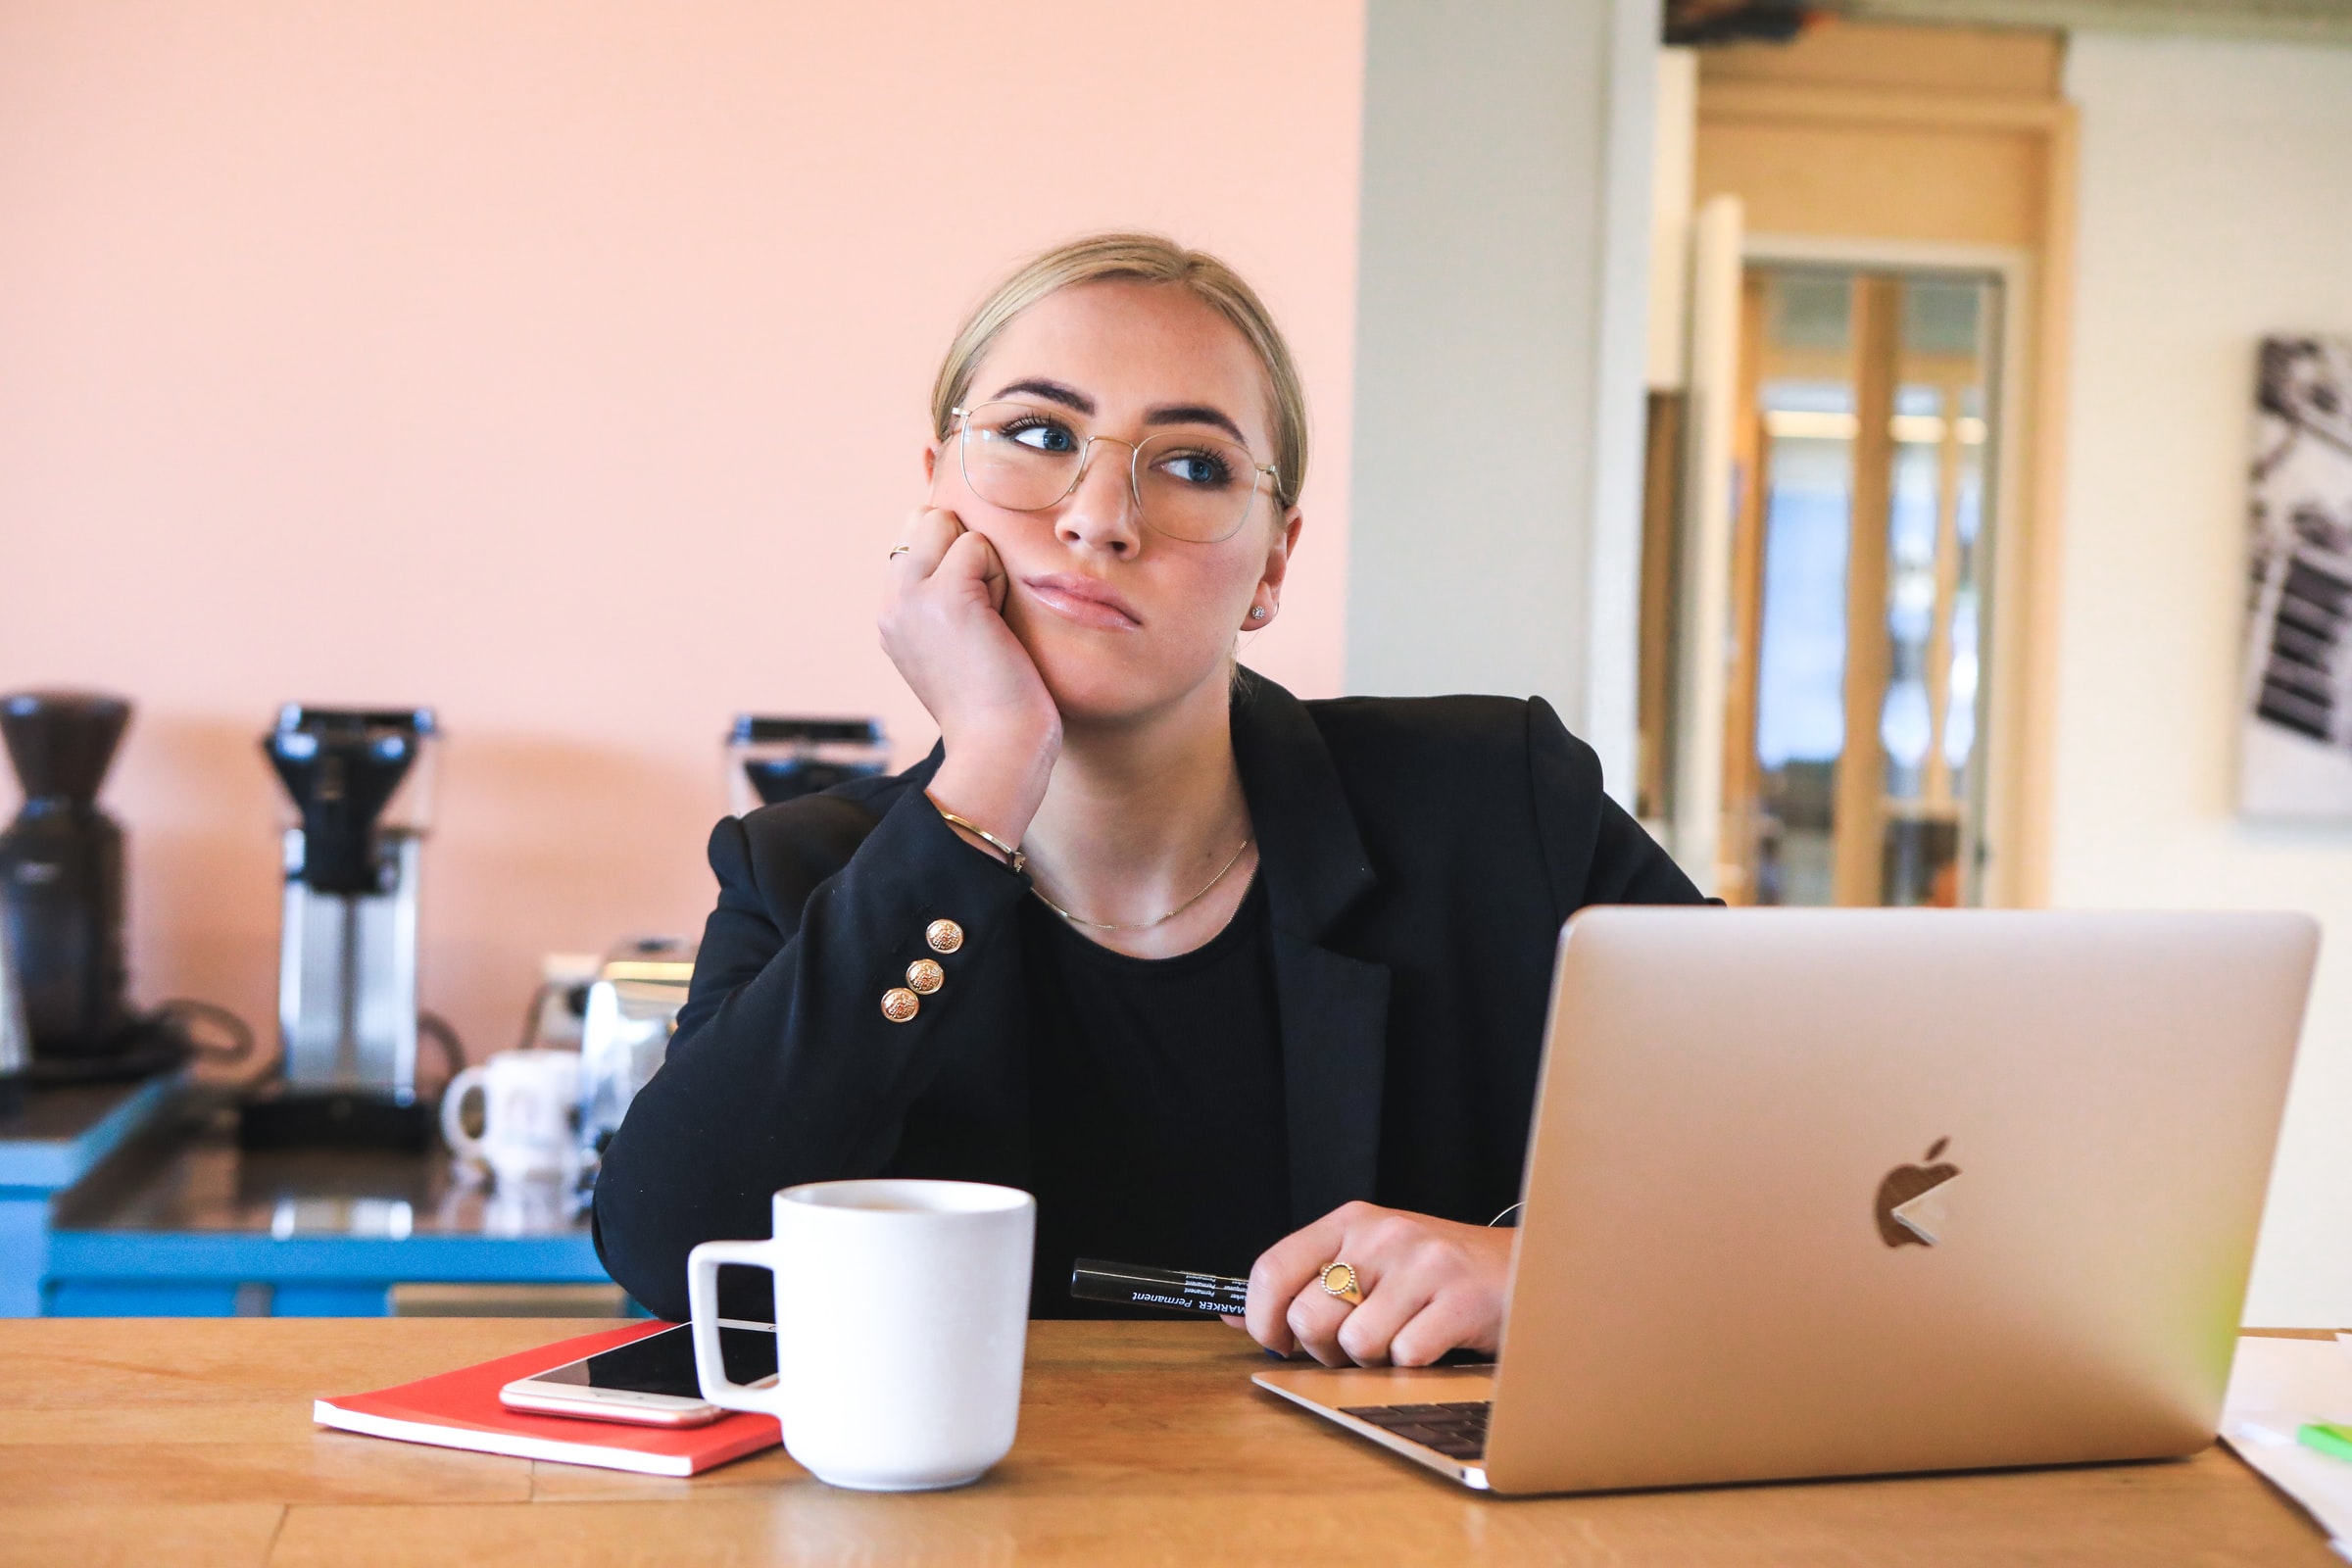 Distracted woman sitting at desk with laptop and coffee cup